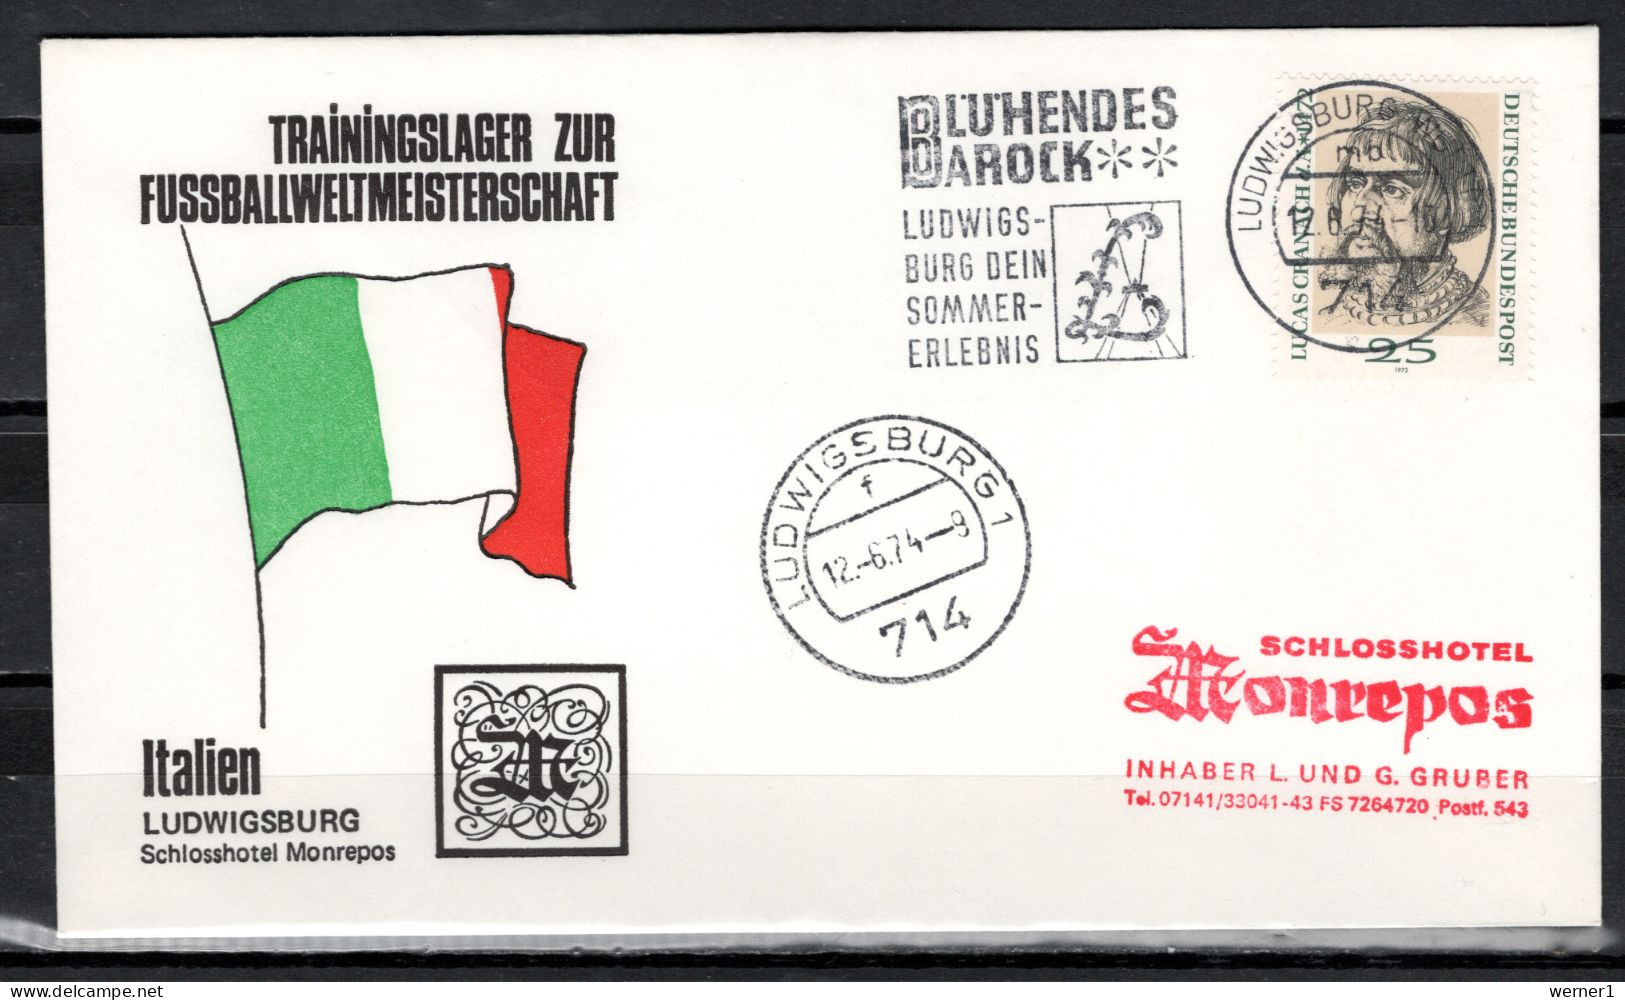 Germany 1974 Football Soccer World Cup Commemorative Cover, Italian Training Camp - 1974 – West Germany